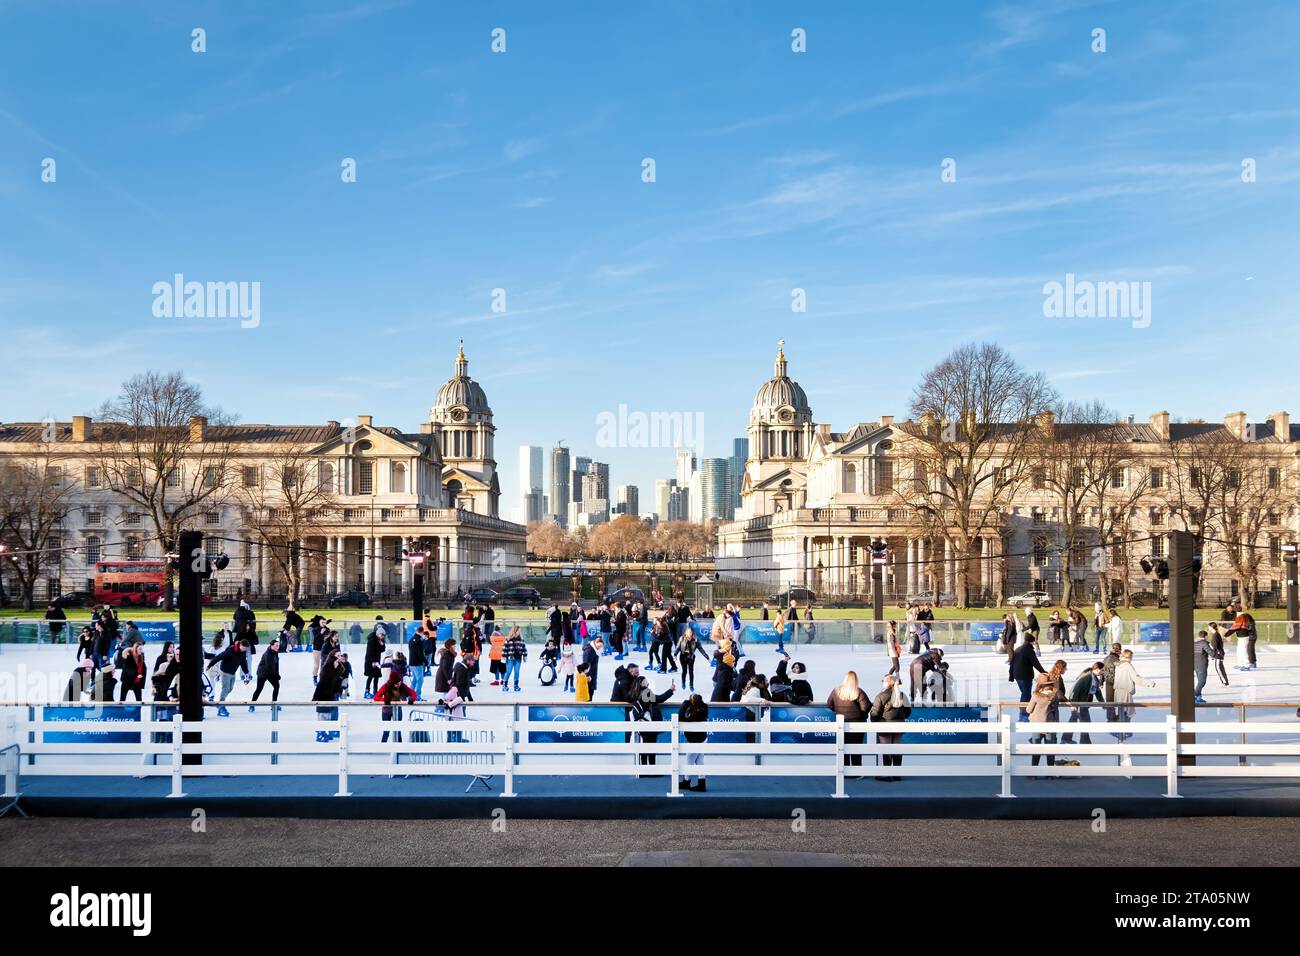 The Greenwich Ice Skating rink located in front of Queens House, London. The open air ice rink is a popular Christmas activity for everyone . Stock Photo